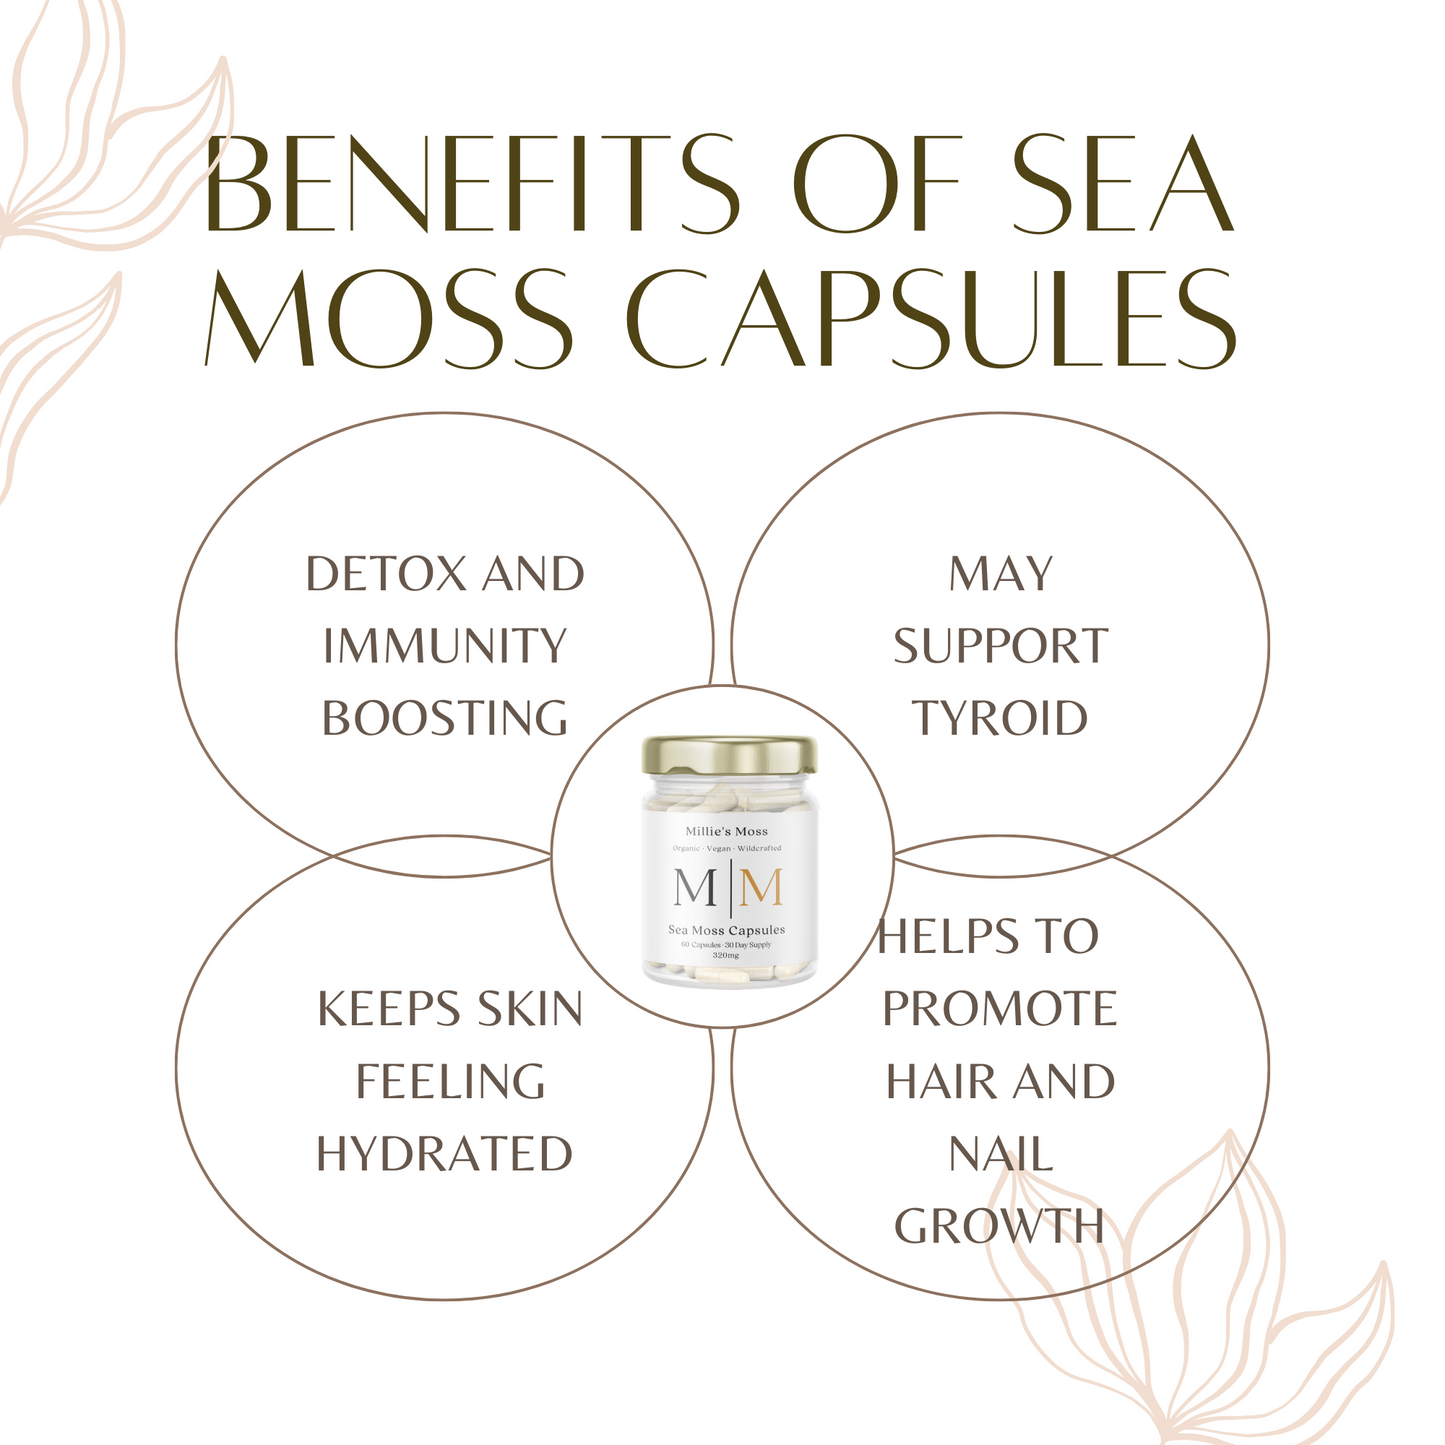 Benefits Of Sea Moss Capsules. Detox And Immunity Boosting. May Support Thyroid. Keeps Skin Feeling Hydrated. Helps To Promote Hair And Nail Growth. 